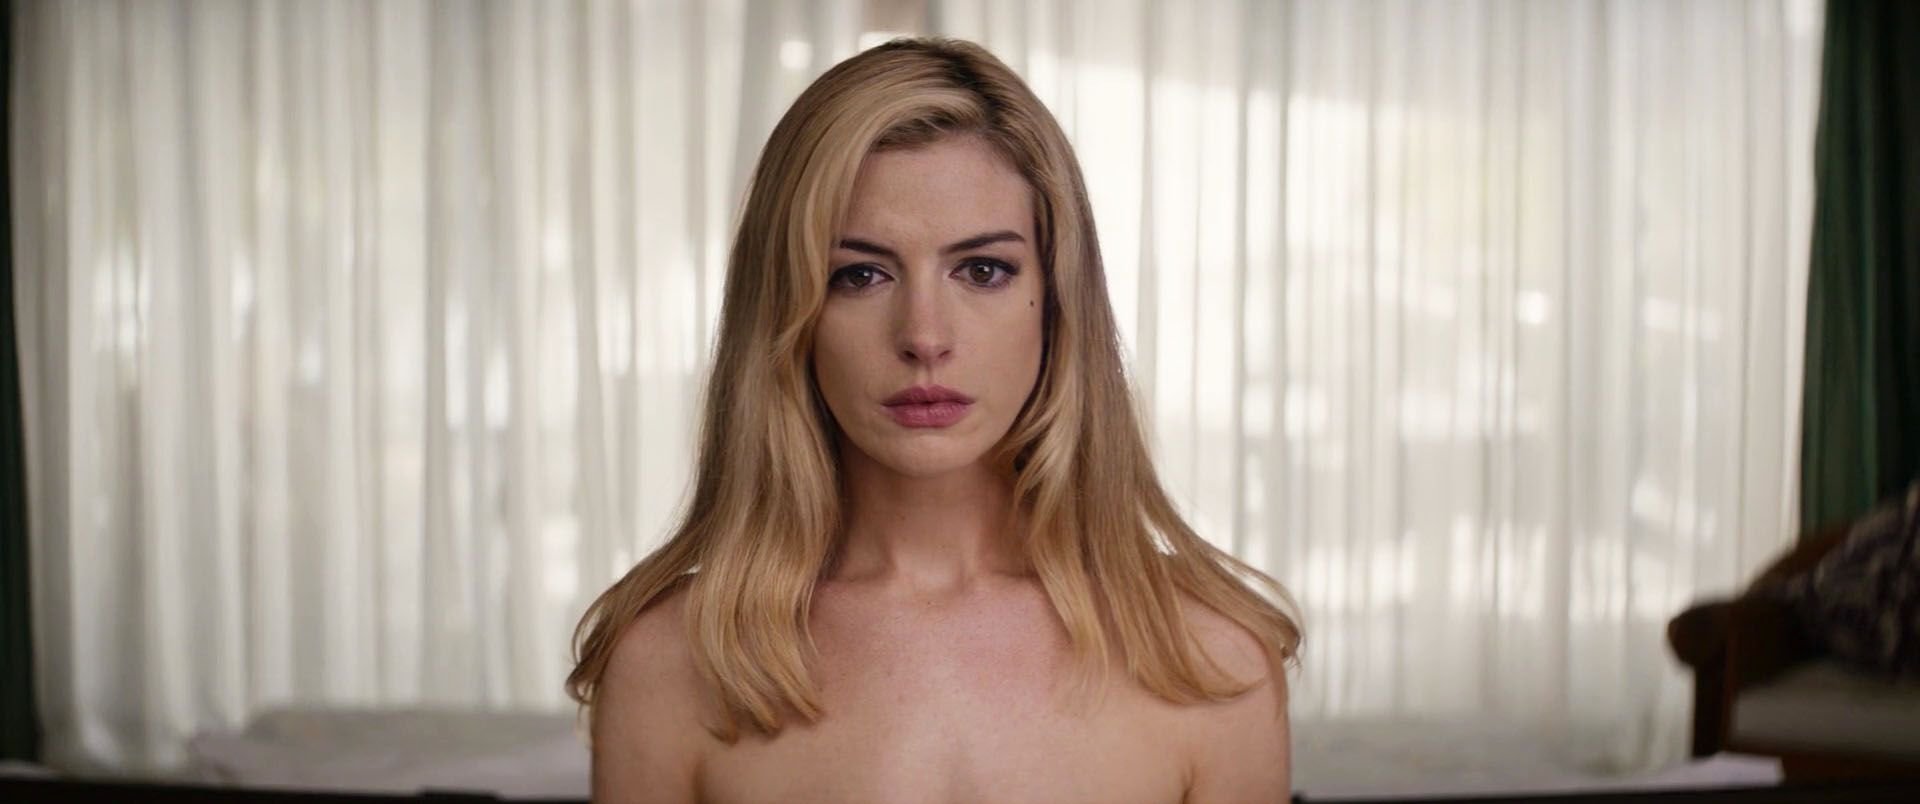 Anne Hathaway Sexy - Serenity (6 Pics + GIF & Video)